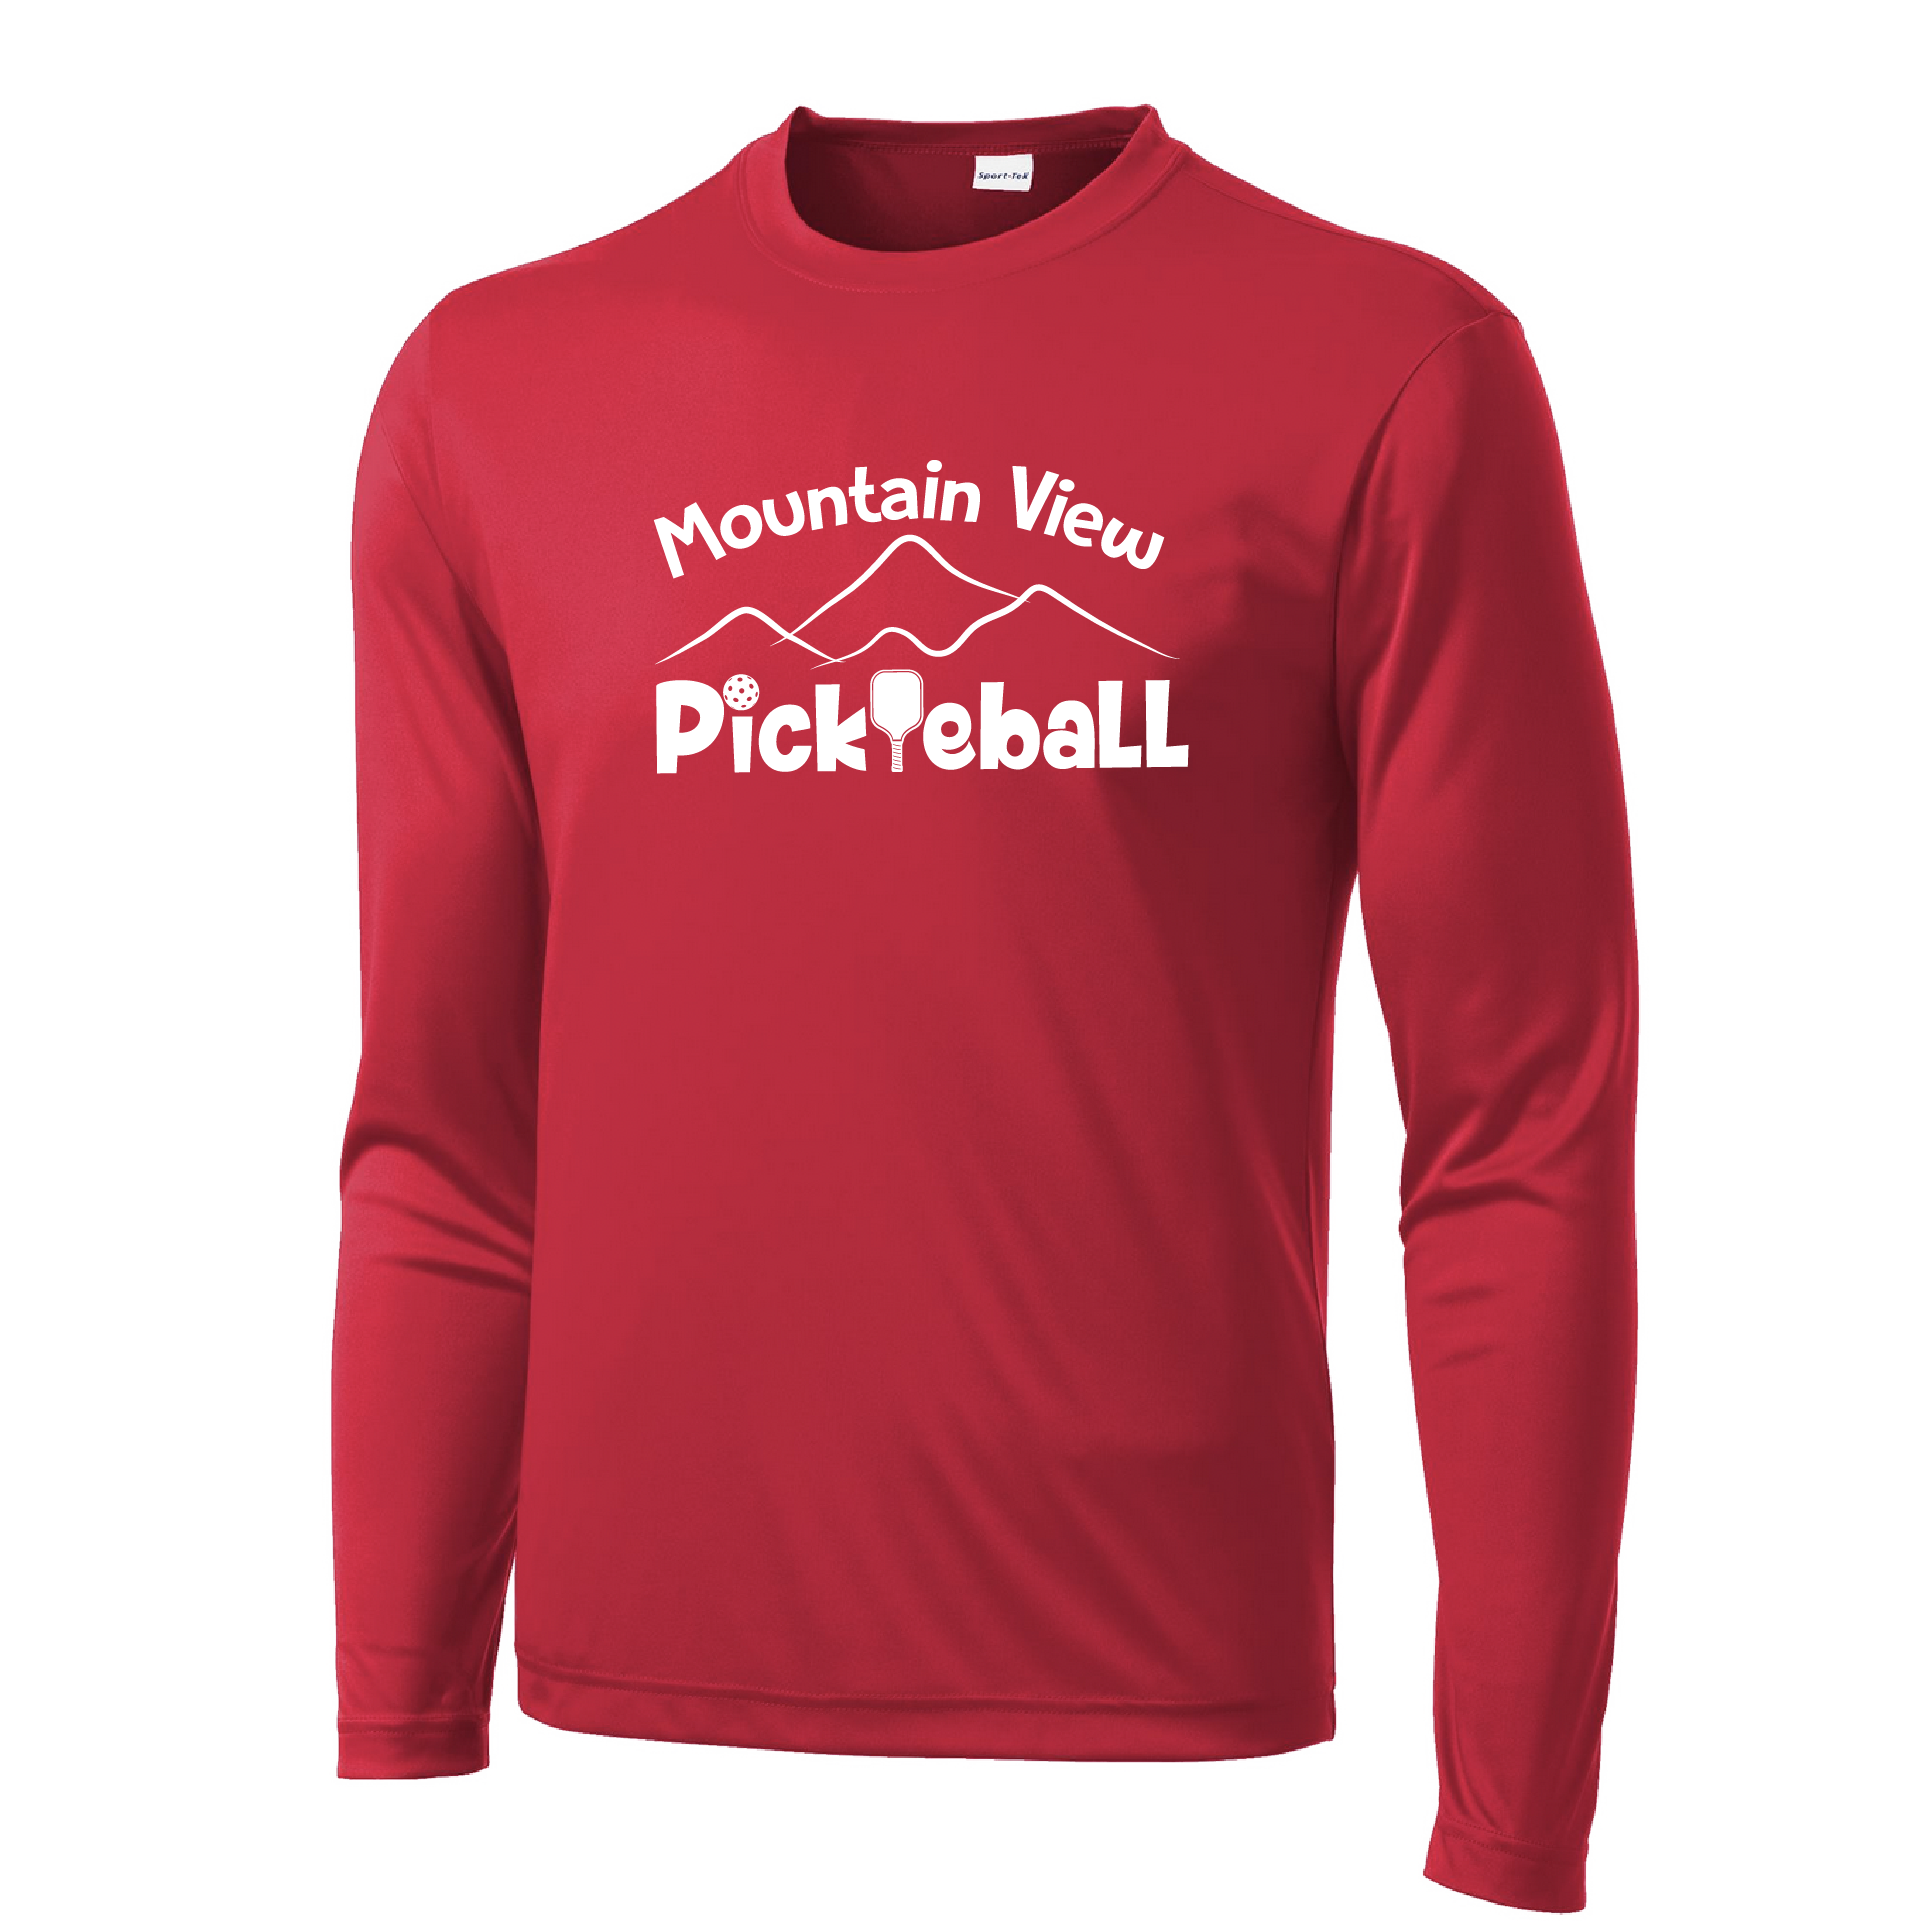  Pickleball Design: Mountain View Pickleball Club  Men's Styles: Long-Sleeve  Turn up the volume in this Men's shirt with its perfect mix of softness and attitude. Material is ultra-comfortable with moisture wicking properties and tri-blend softness. PosiCharge technology locks in color. Highly breathable and lightweight.